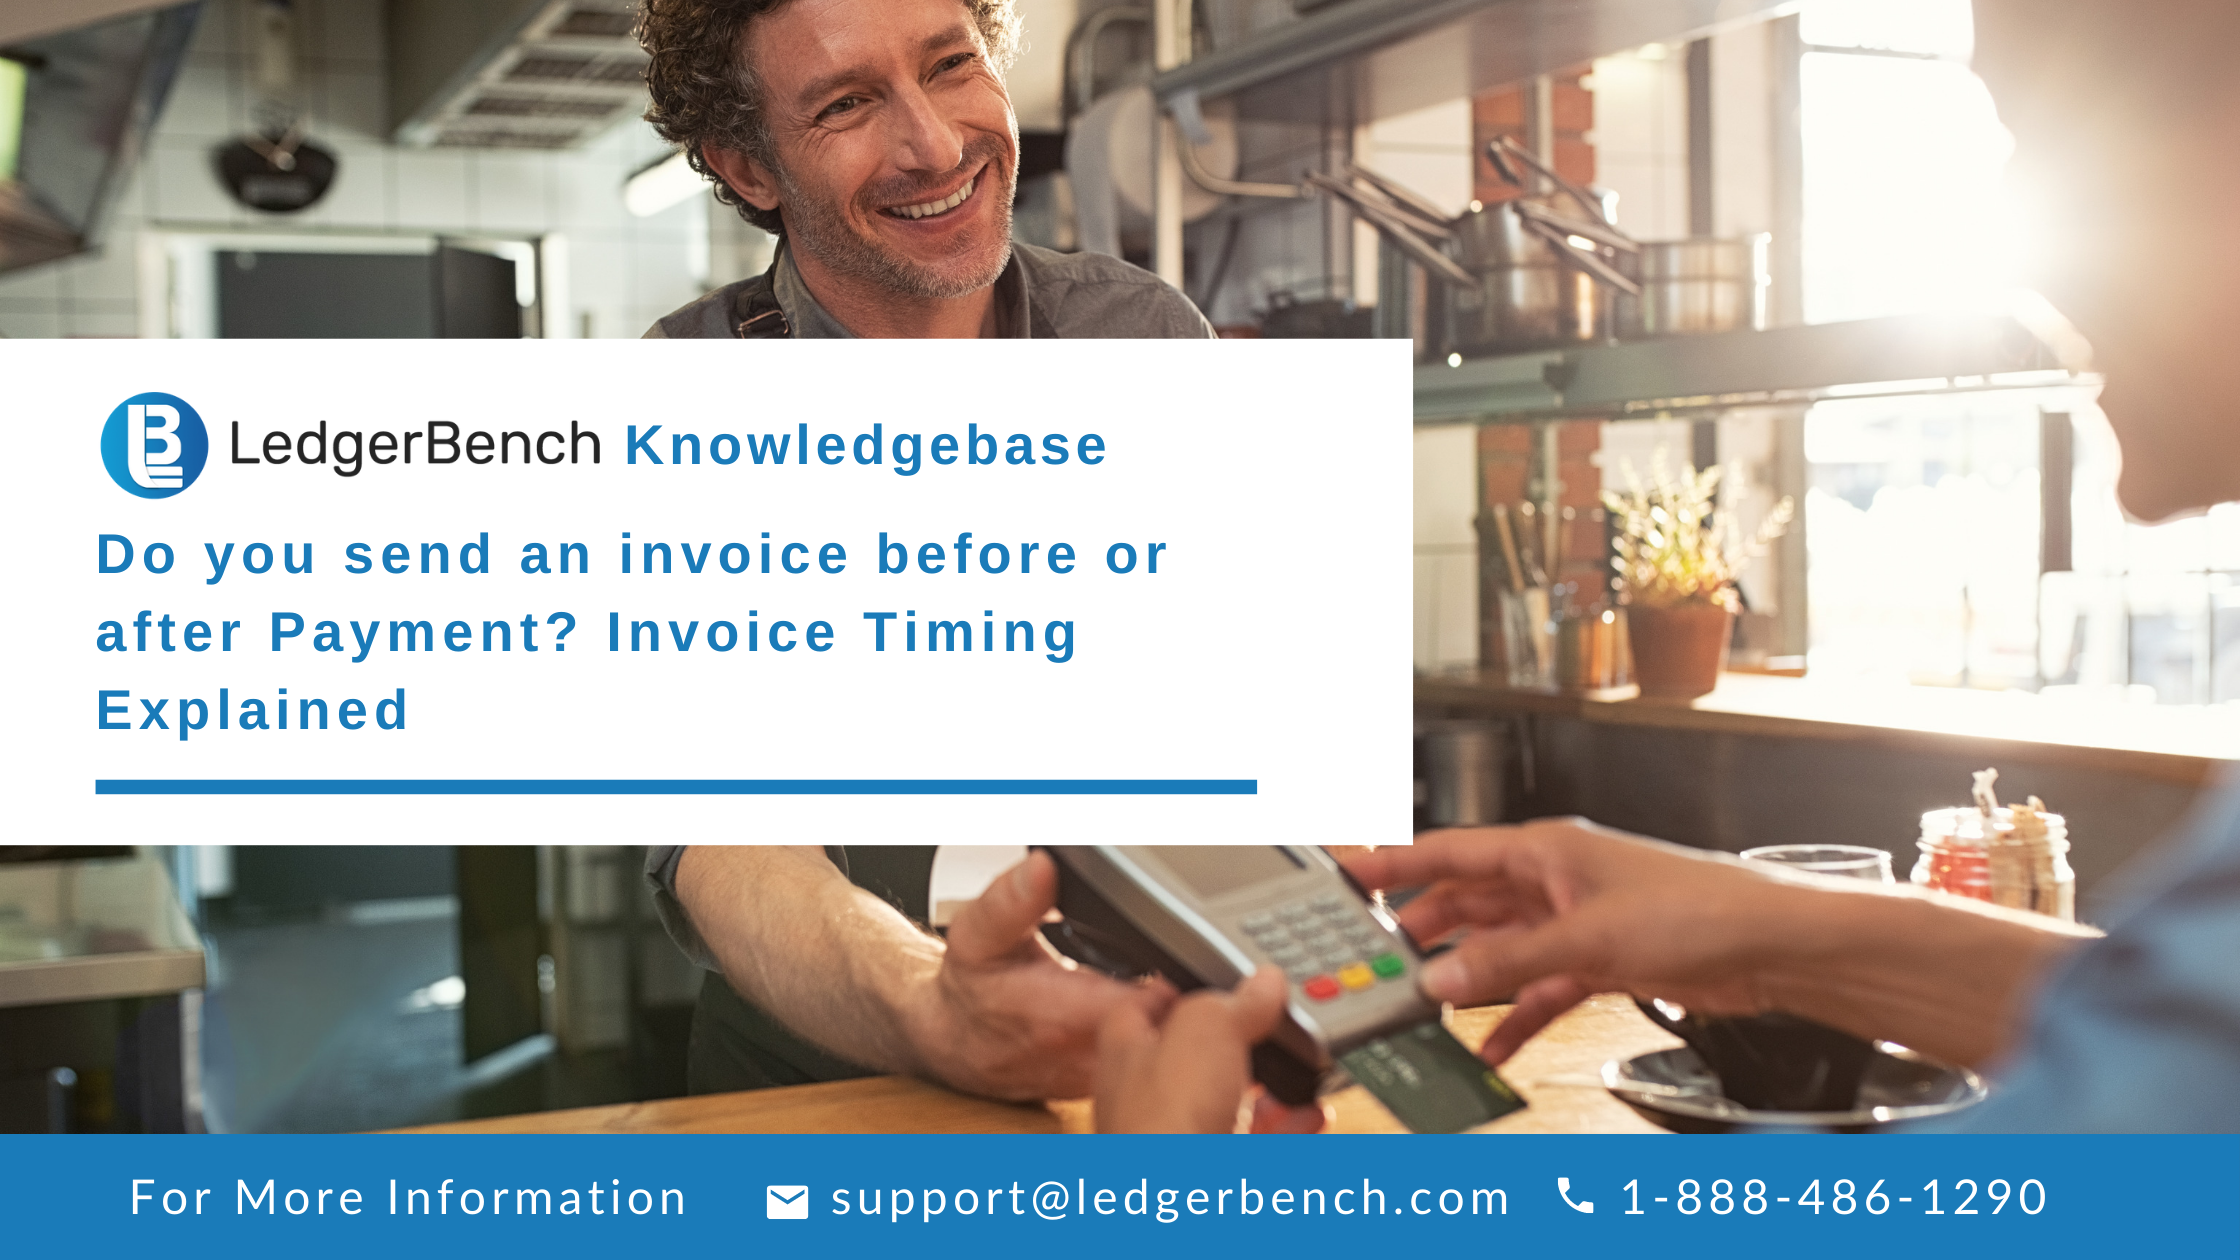 Do you send an invoice before or after Payment? Invoice Timing Explained